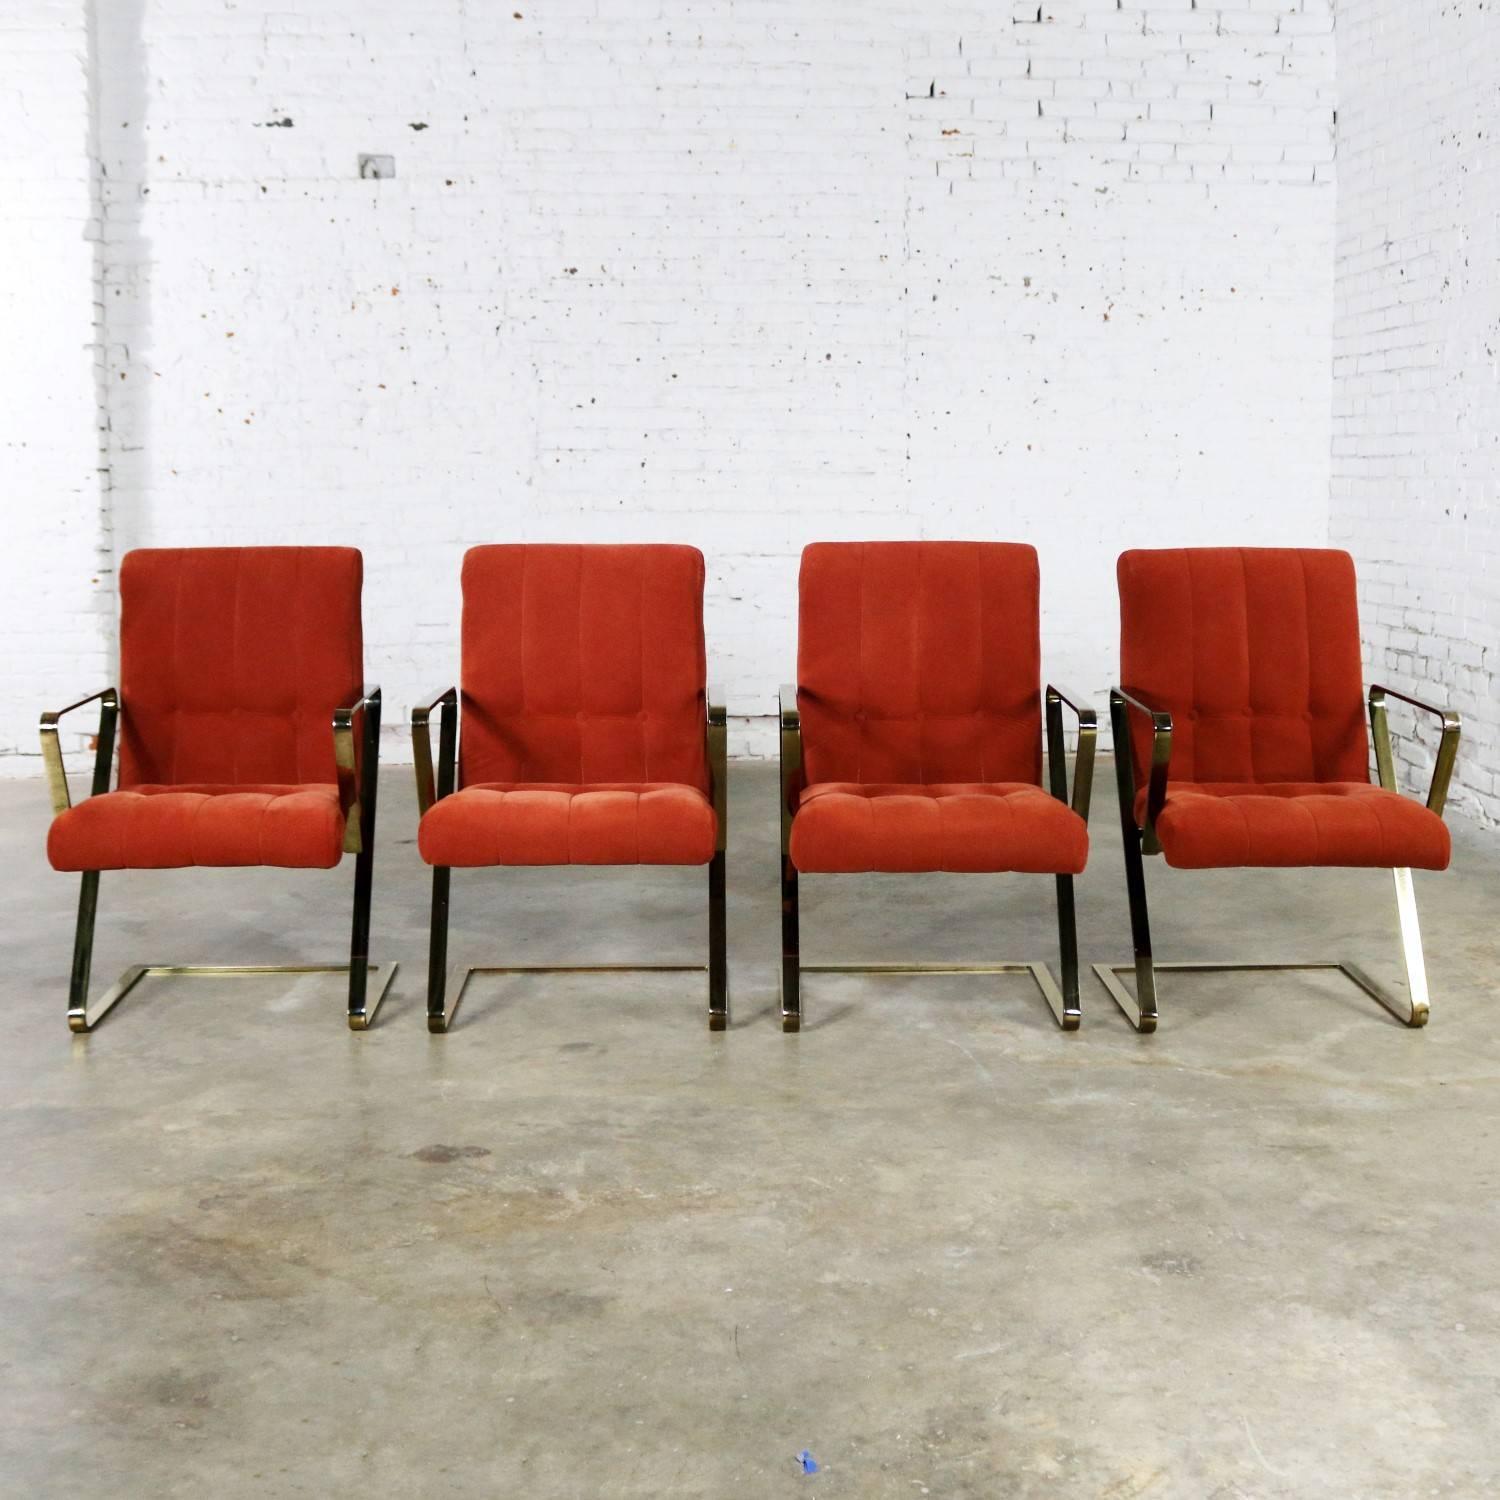 American Z Frame Brass Plate Dining Chairs Style Milo Baughman, Set of Four